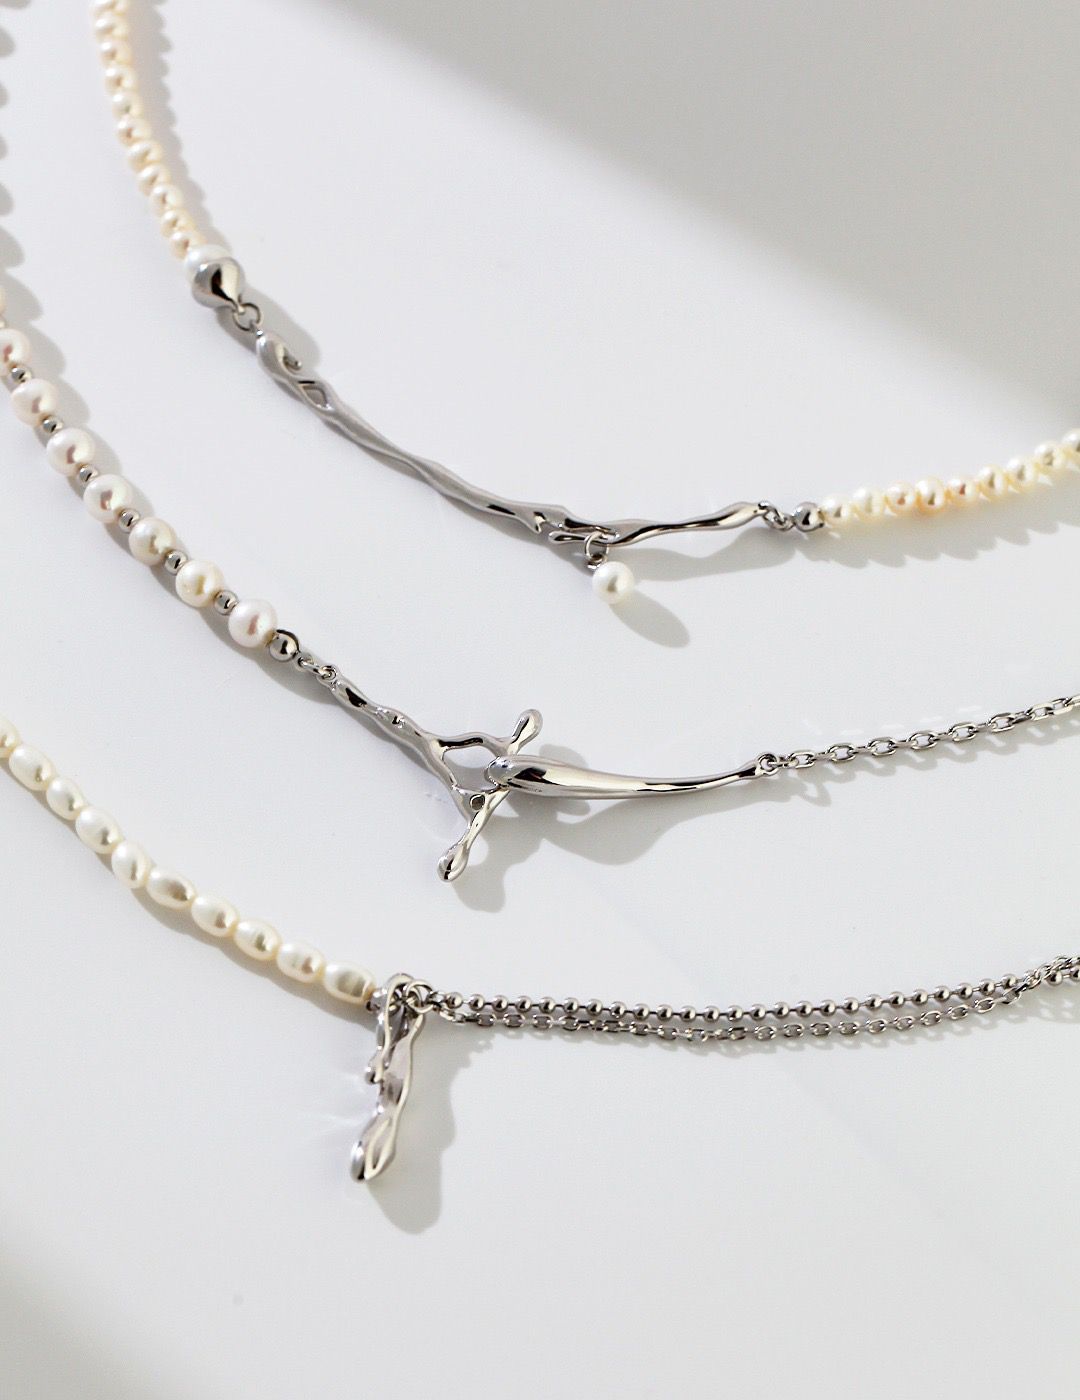 Minimalist Pearl Collar Necklace with Freshwater Pearls on a Sleek Collar Design